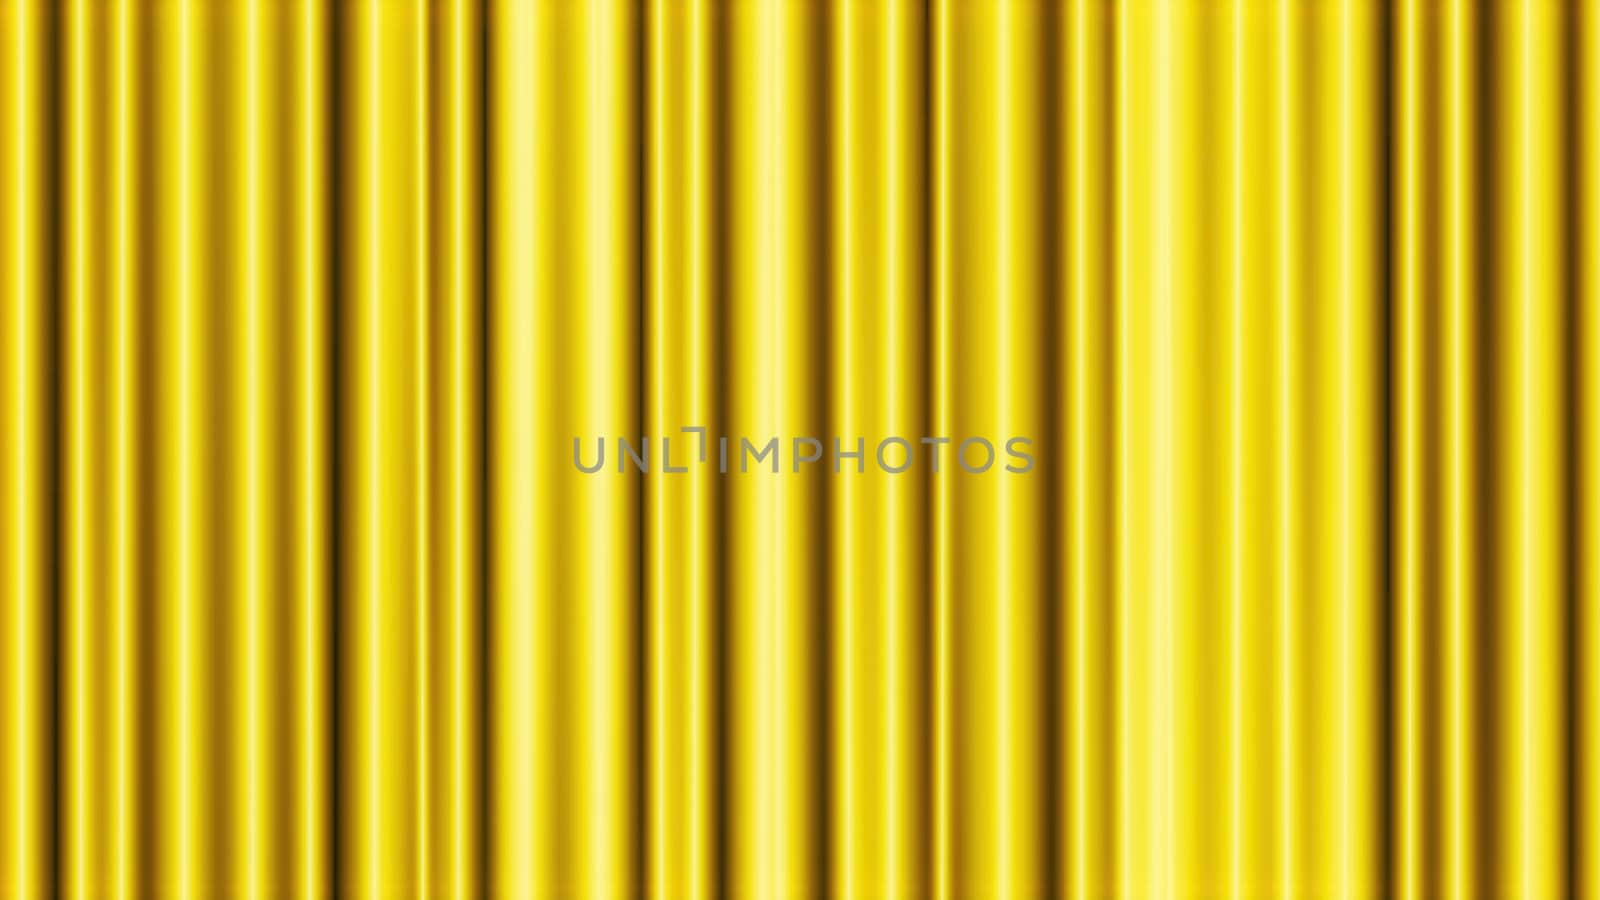 Golden abstract background. texture cells pattern